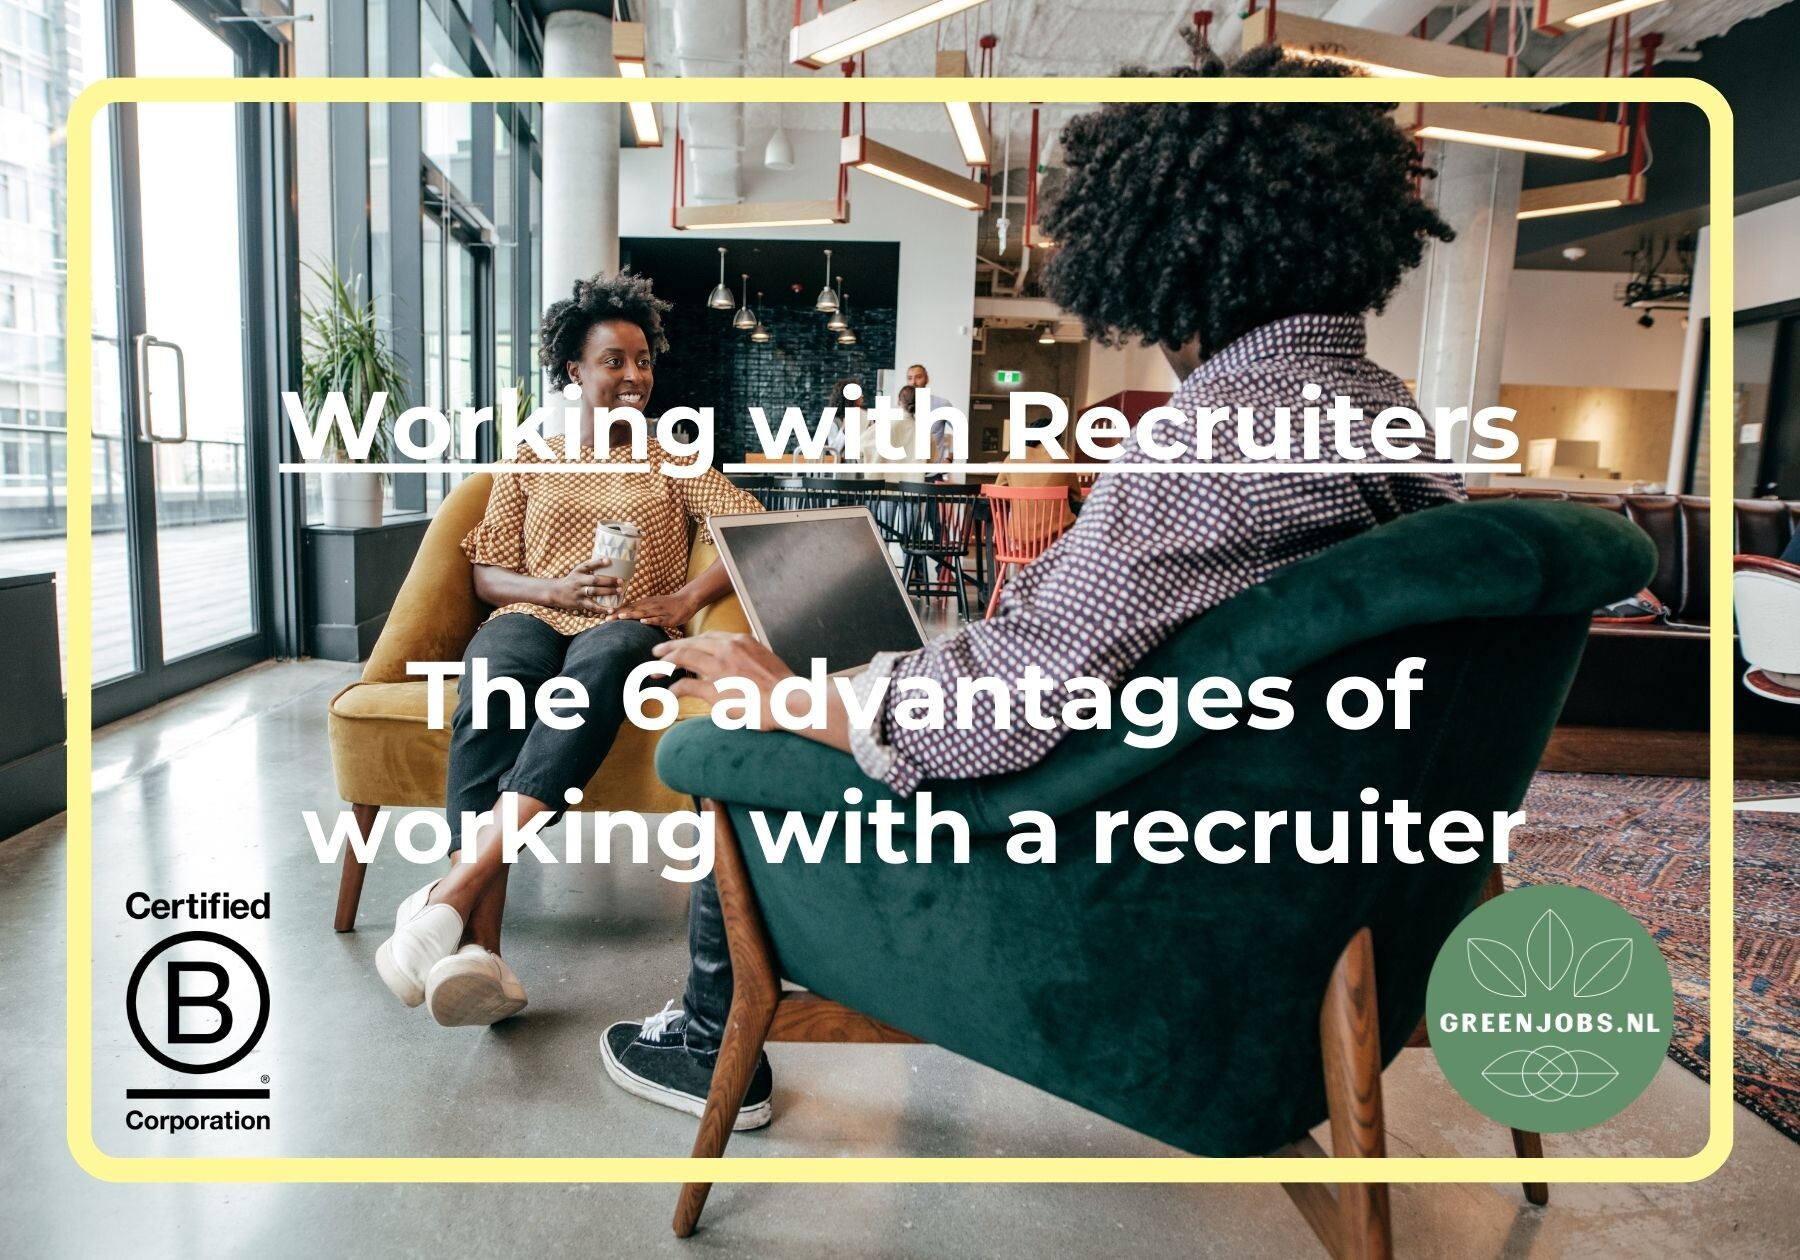 The 6 advantages of working with a Recruiter